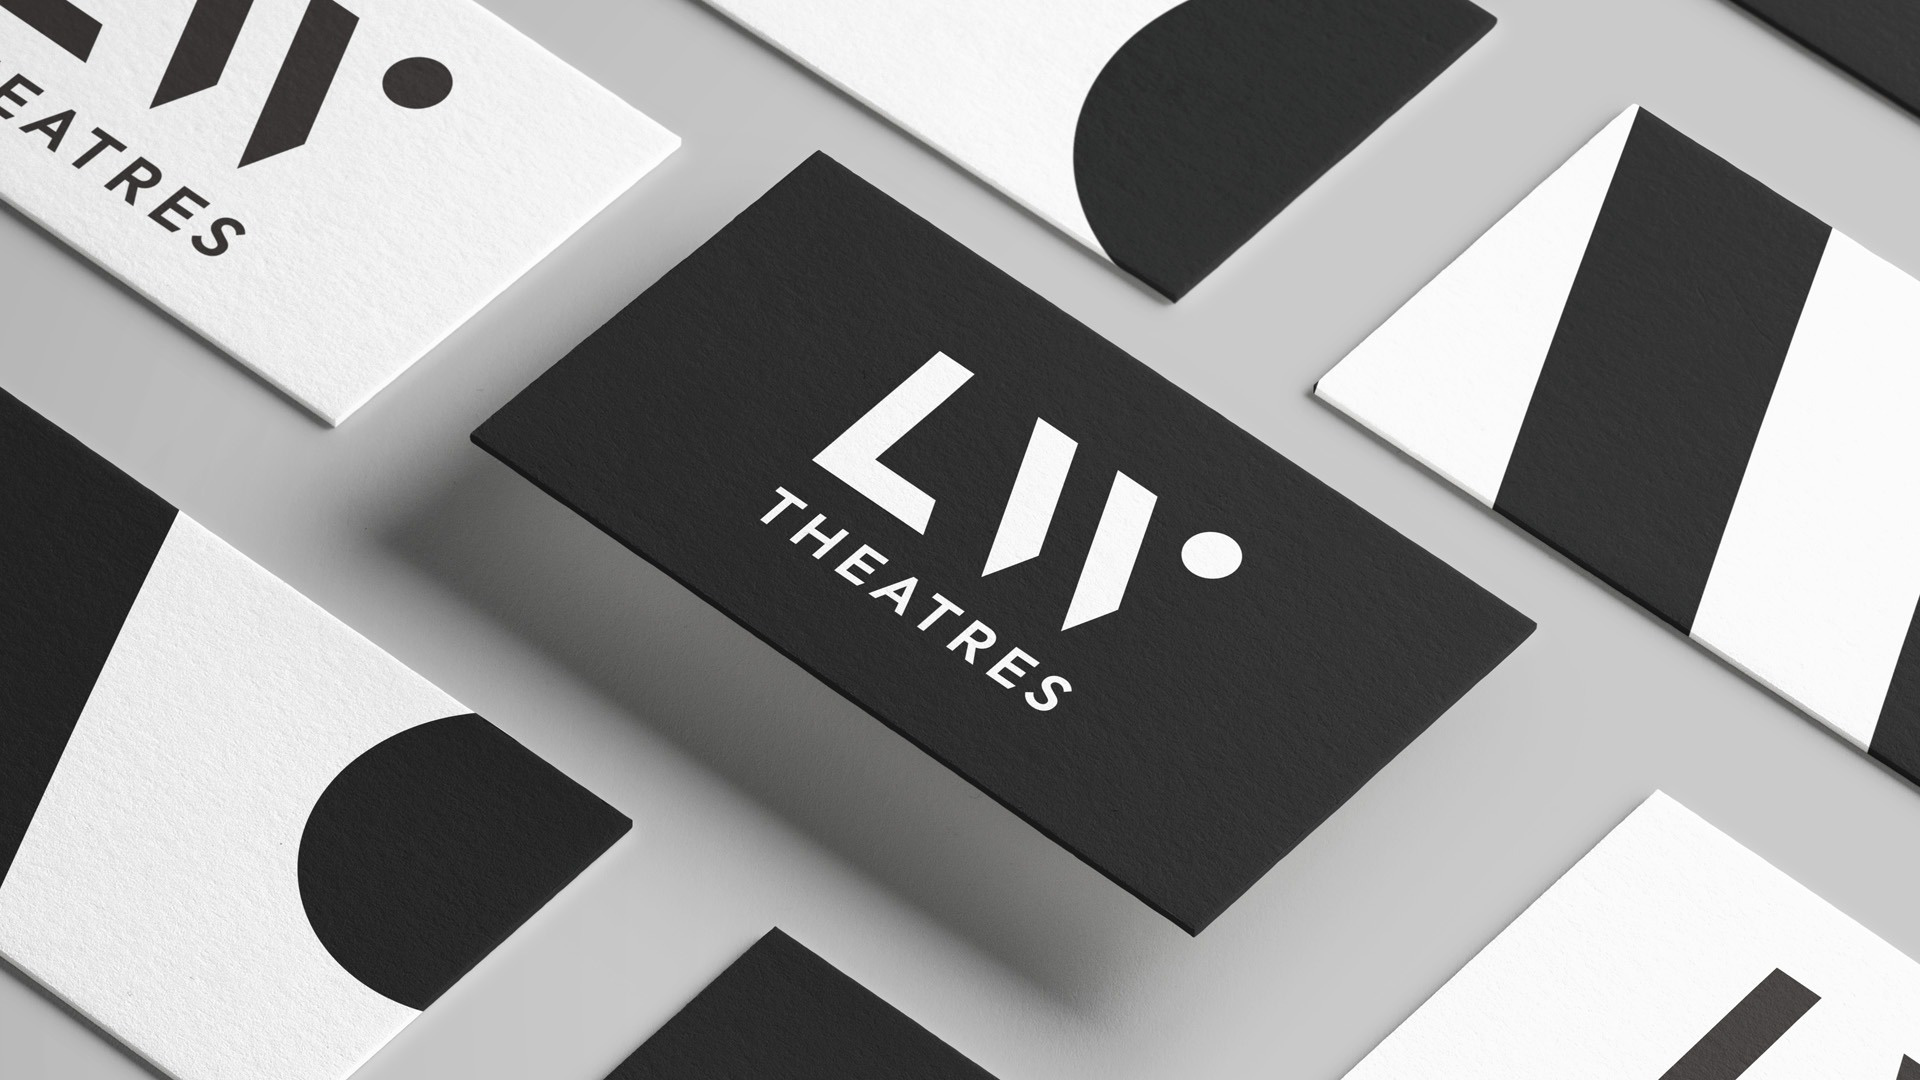 New Logo and Identity for LW Theatres by Elmwood